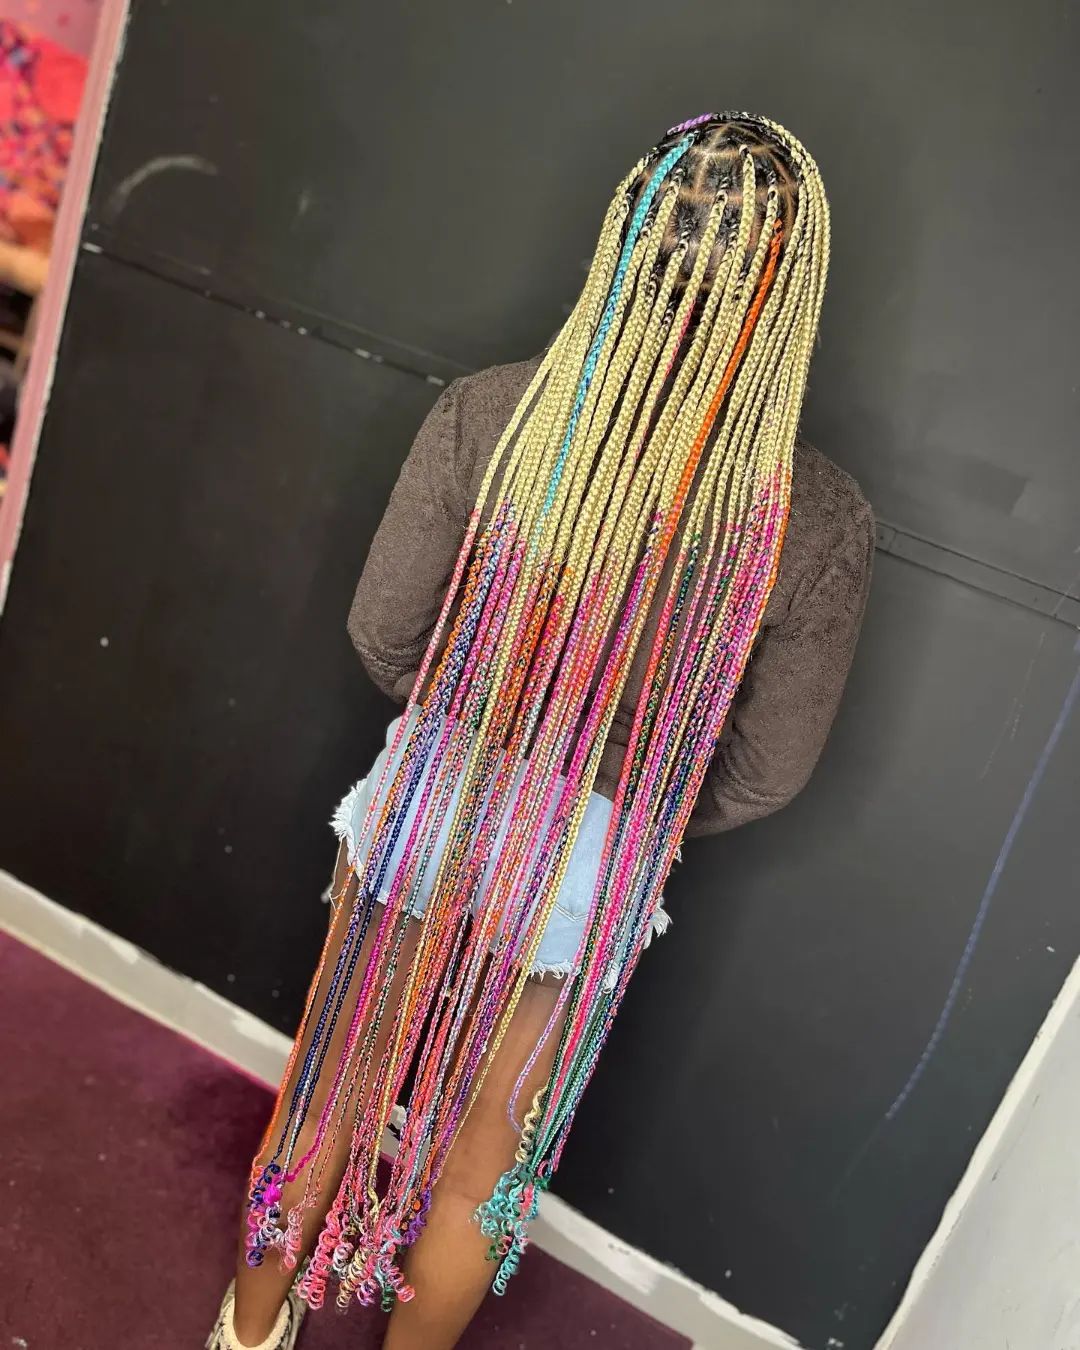 43. Lengthy Knotless Braids of Many Colors